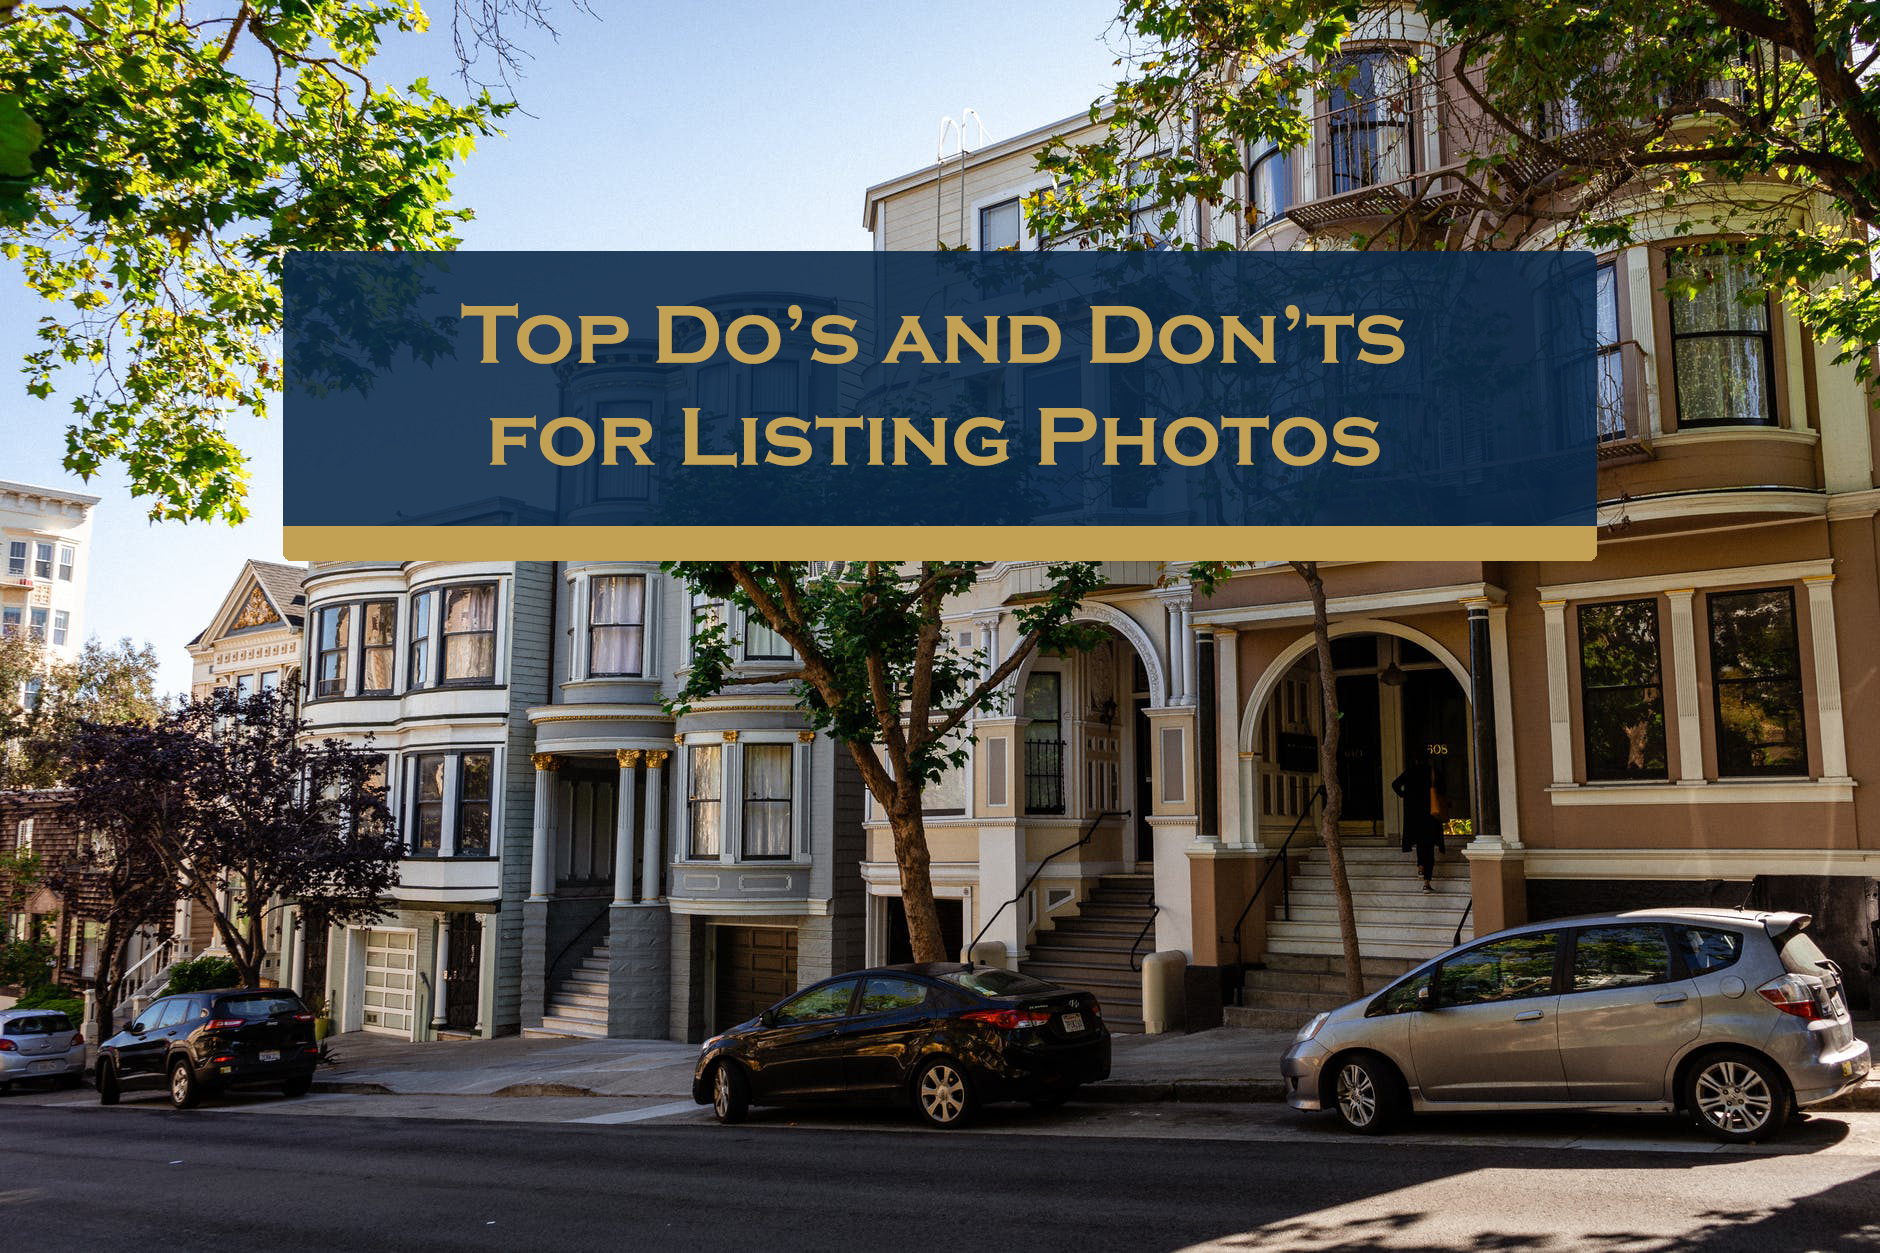 Top Do's and Don'ts for Listing Photos